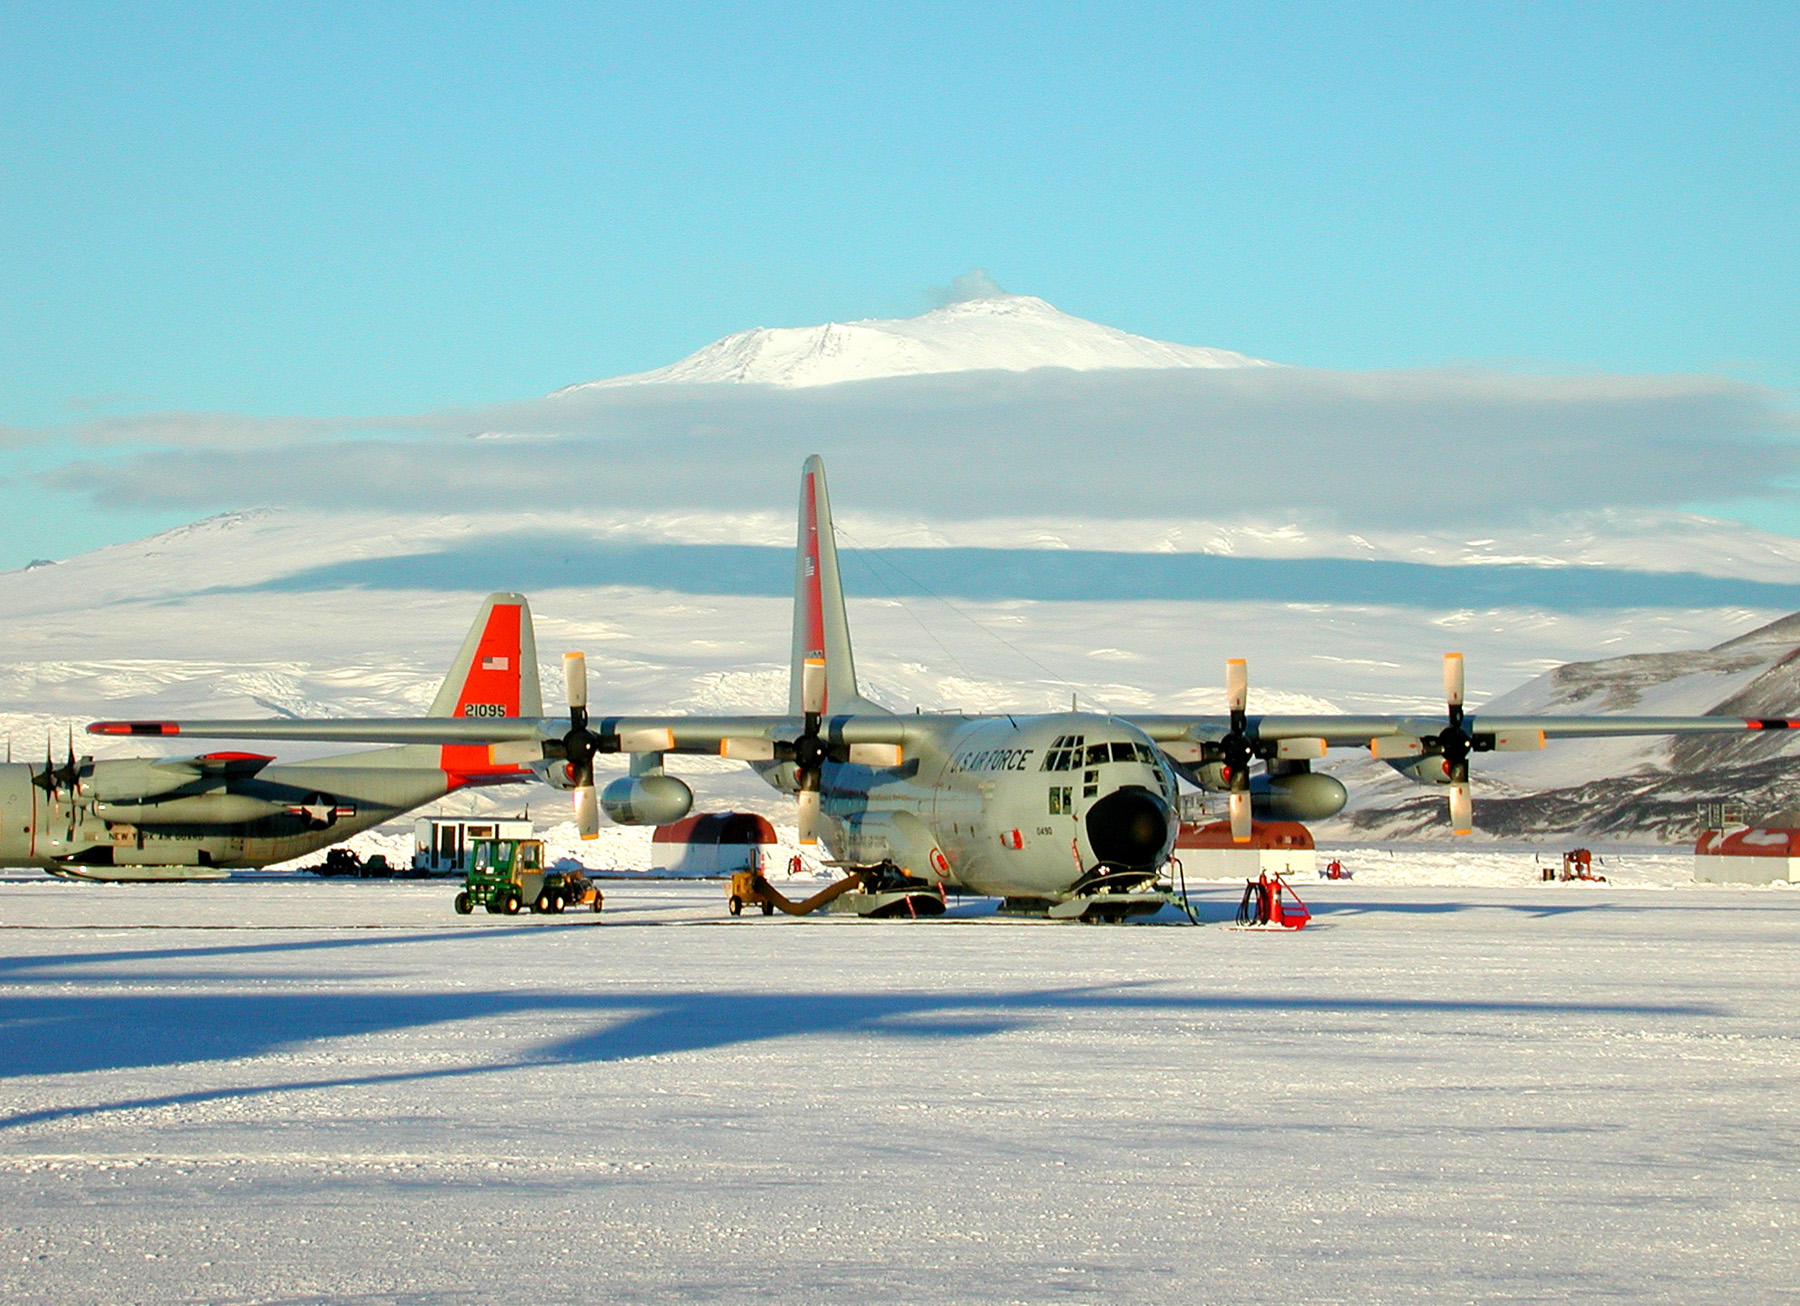 Airplanes with four propellers and skis, sit on ice, with a snow-covered mountain in the distance.